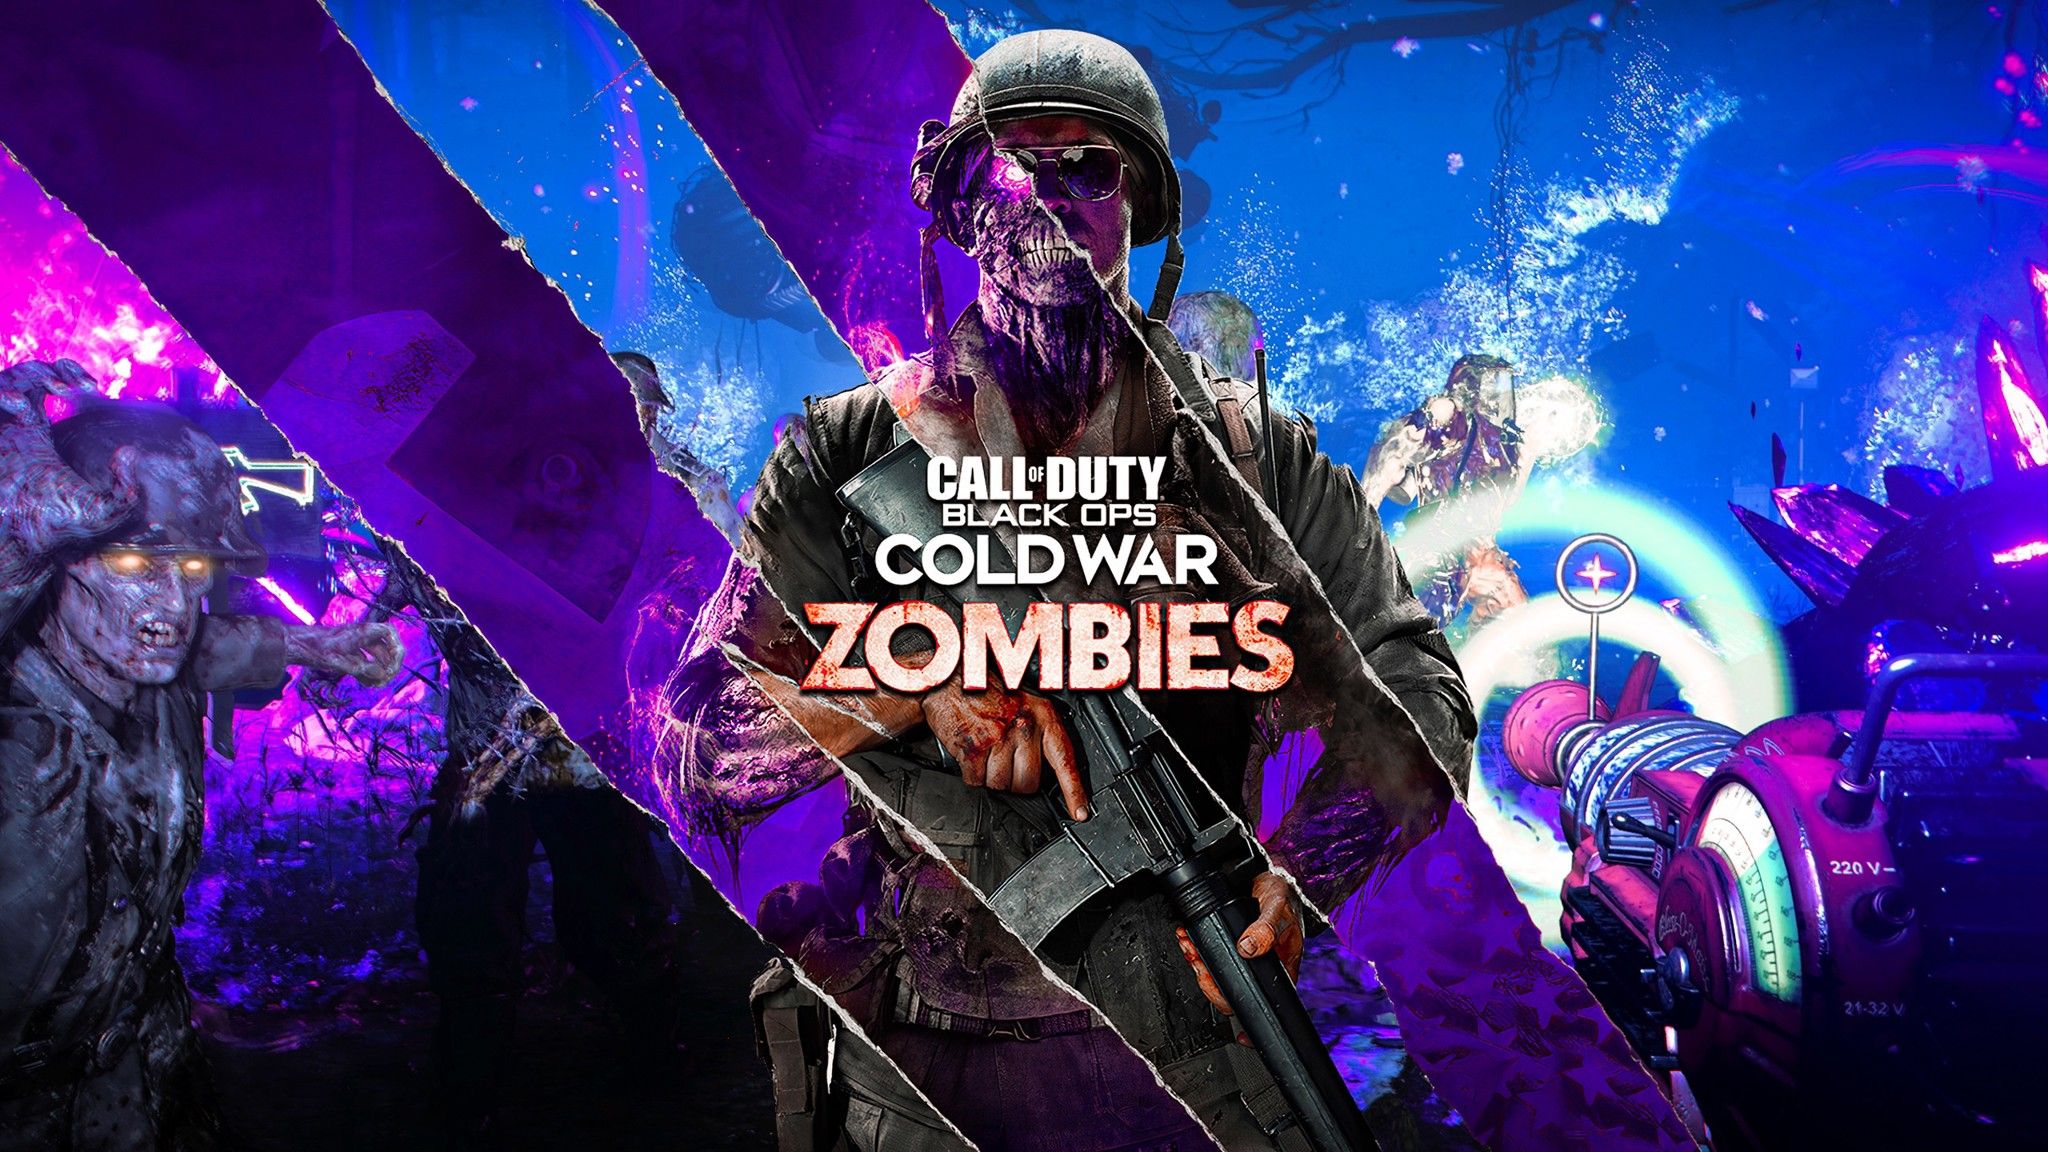 Tổng hợp game miễn phí ngày 16/1: CoD: Black Ops Cold War Zombies, Star Wars Battlefront II, Bomber Crew